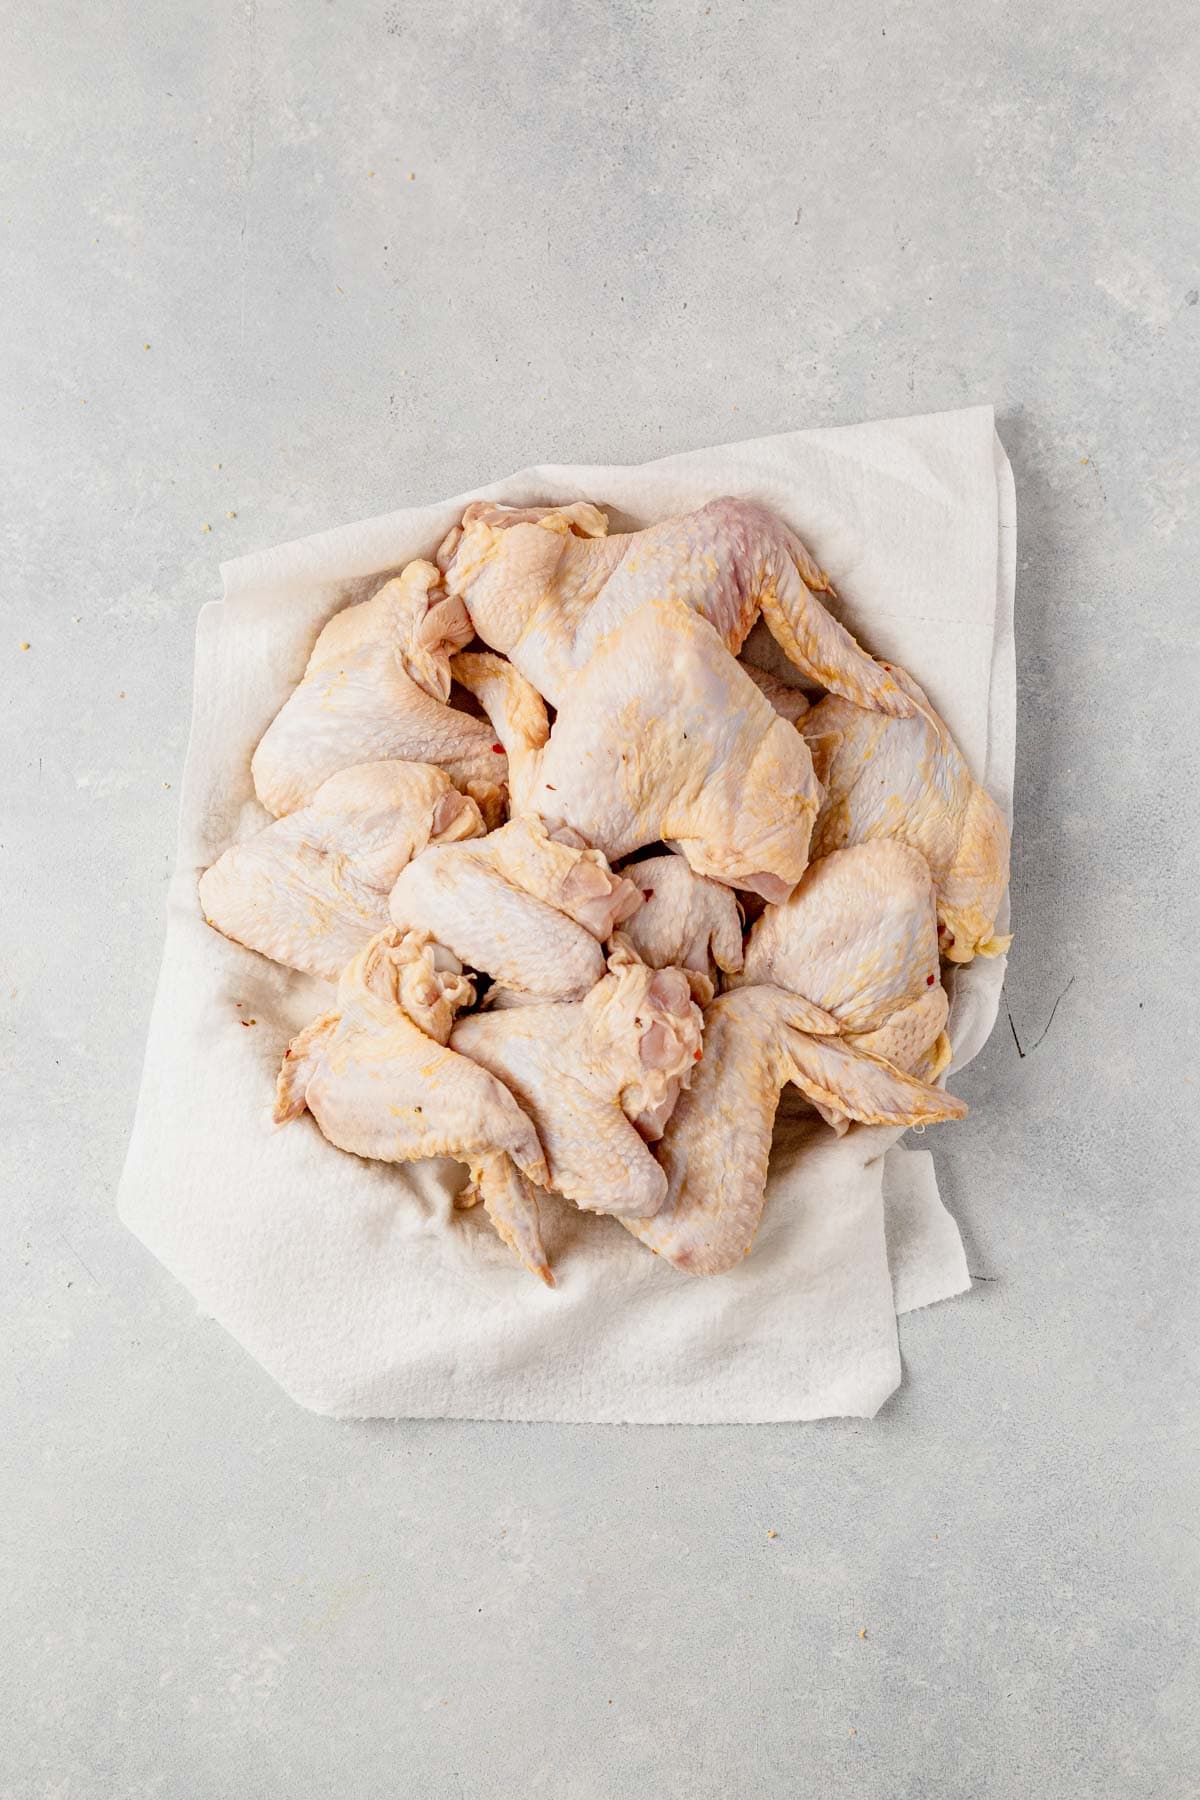 brined chicken wings patted dry with paper towels